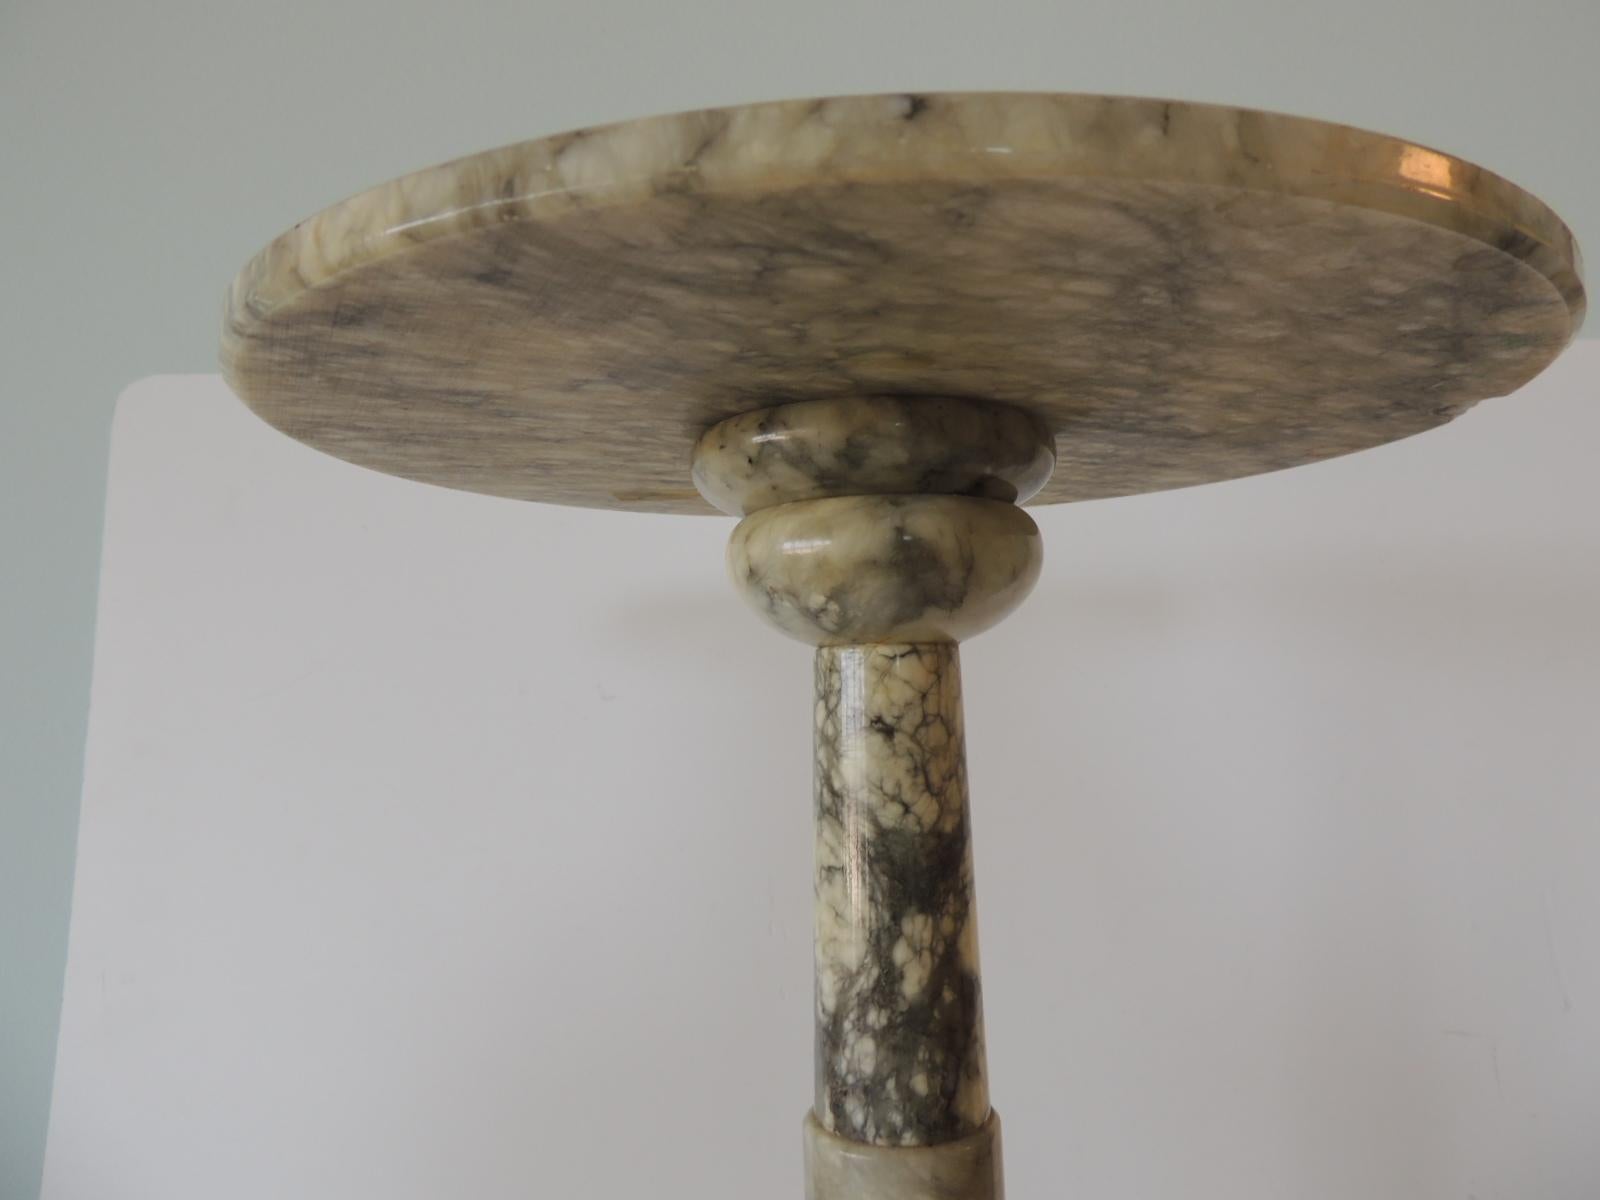 Hand-Crafted Vintage Round Grey and White Italian Carrera Marble Side Table